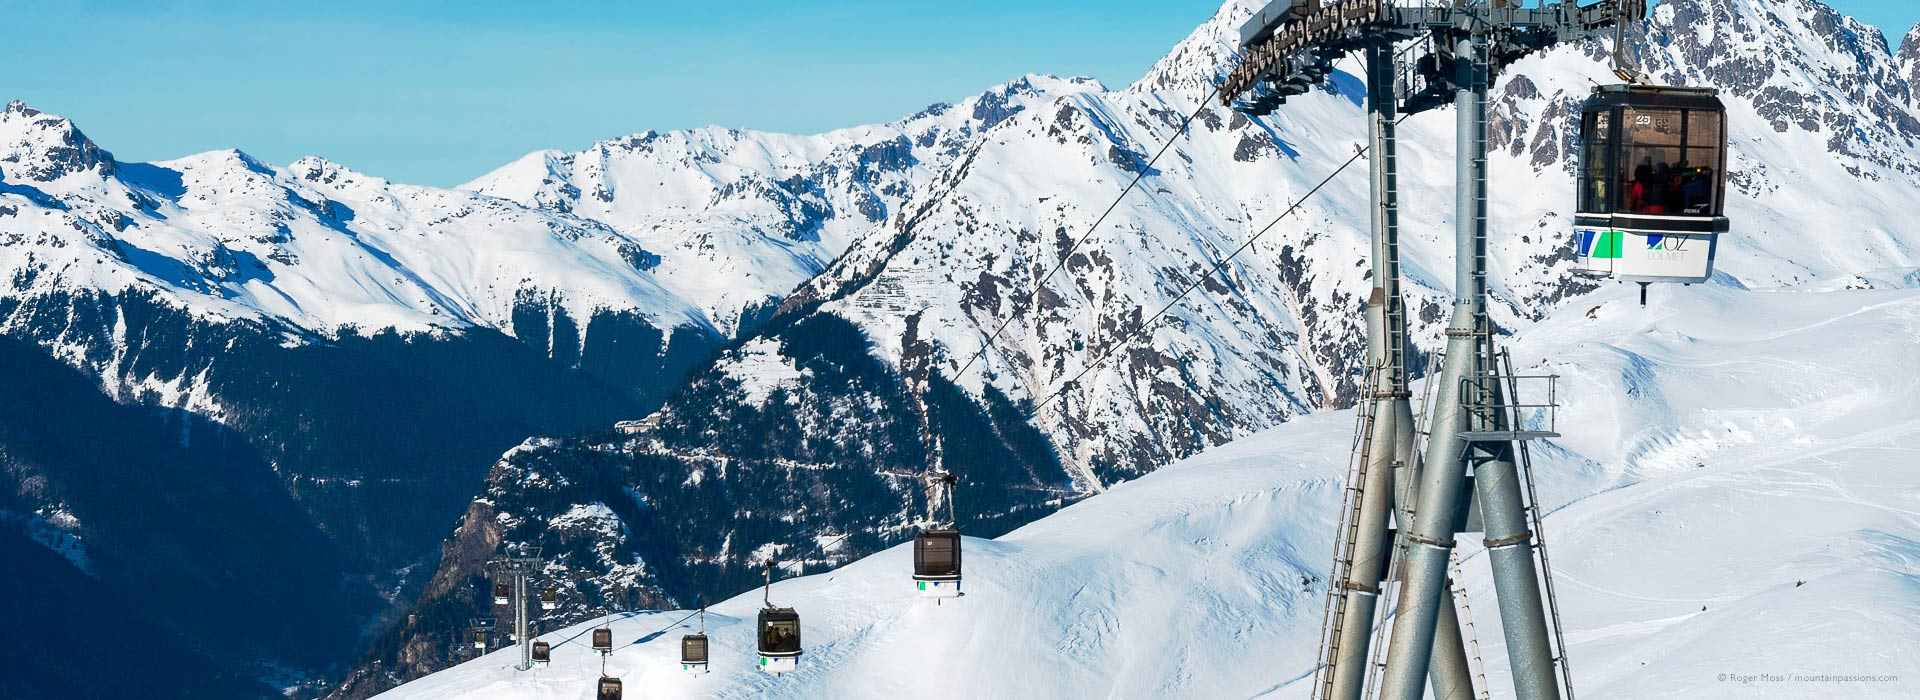 View of gondola lift from Oz-en-Oisans to the ski area of l'Alpe d'Huez, showing valley.